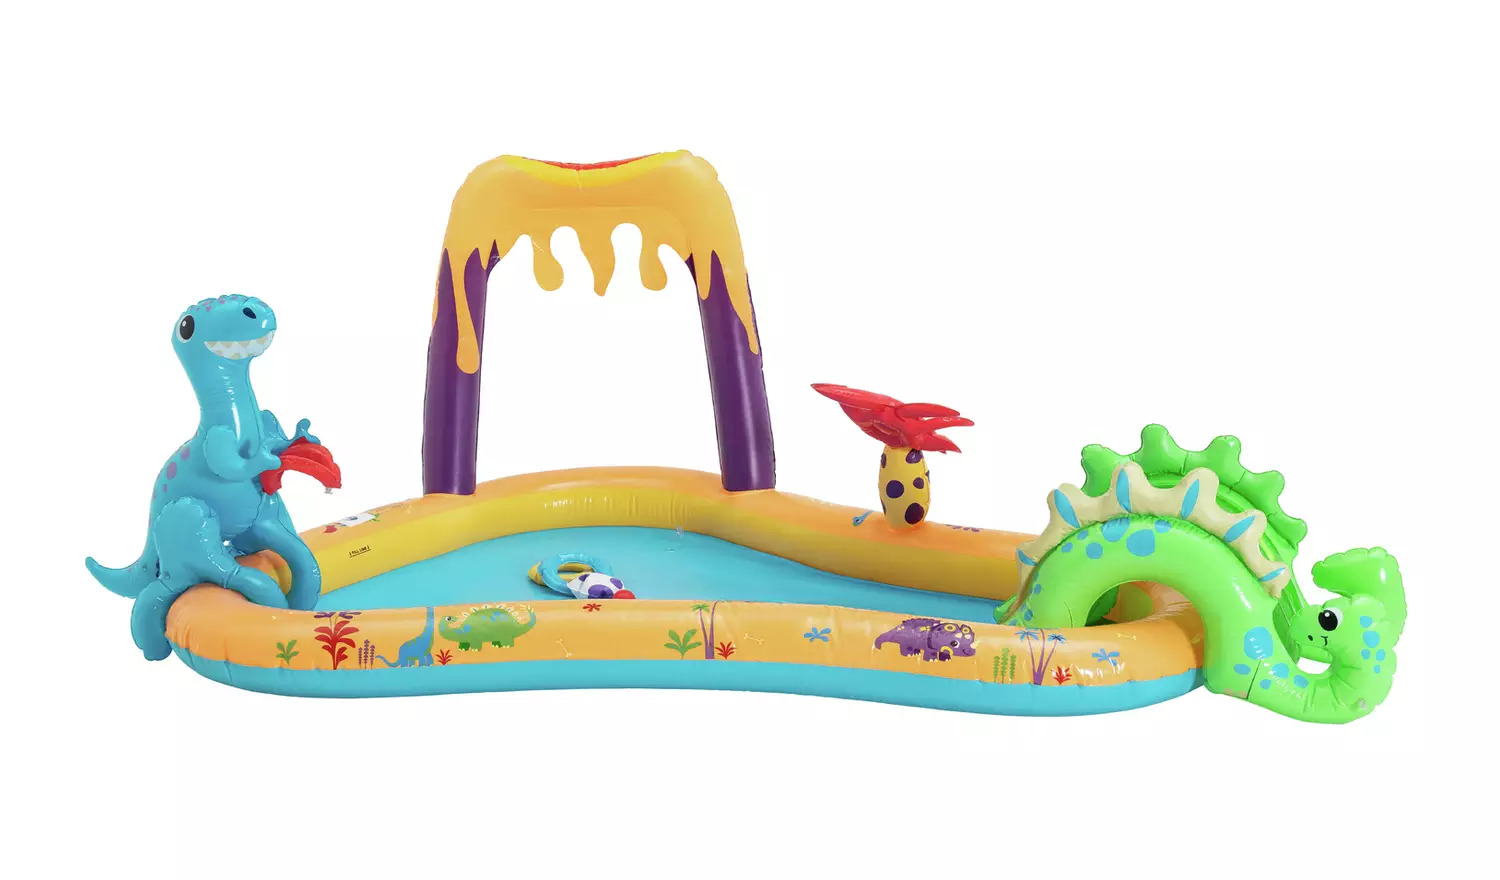 The dinosaur water activity inflatable also has £20